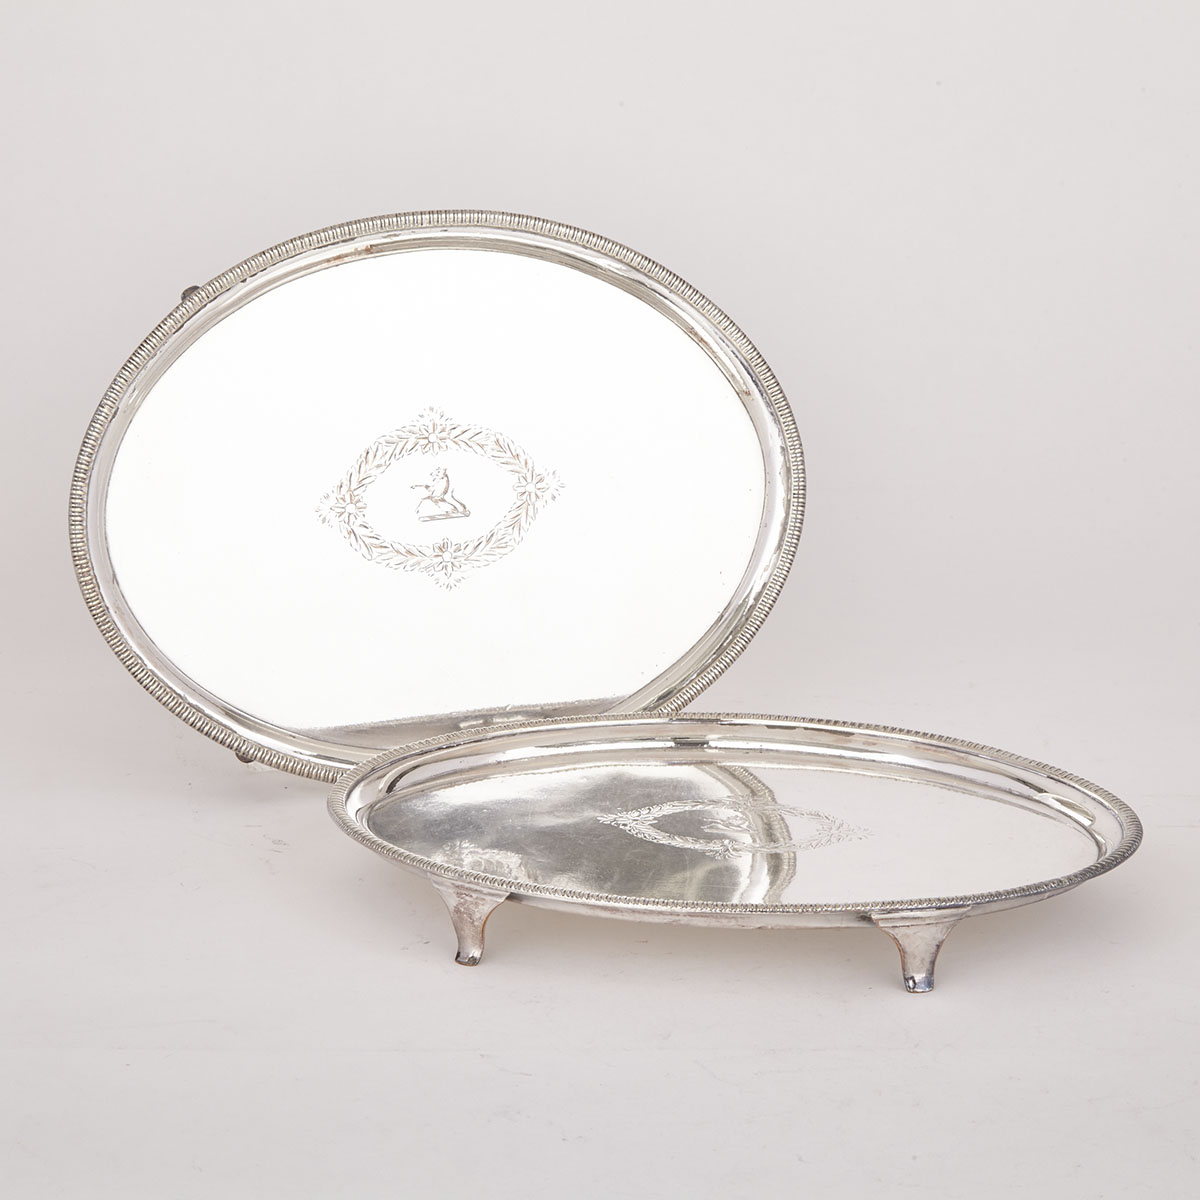 Pair of Old Sheffield Plate Oval Salvers, c.1800